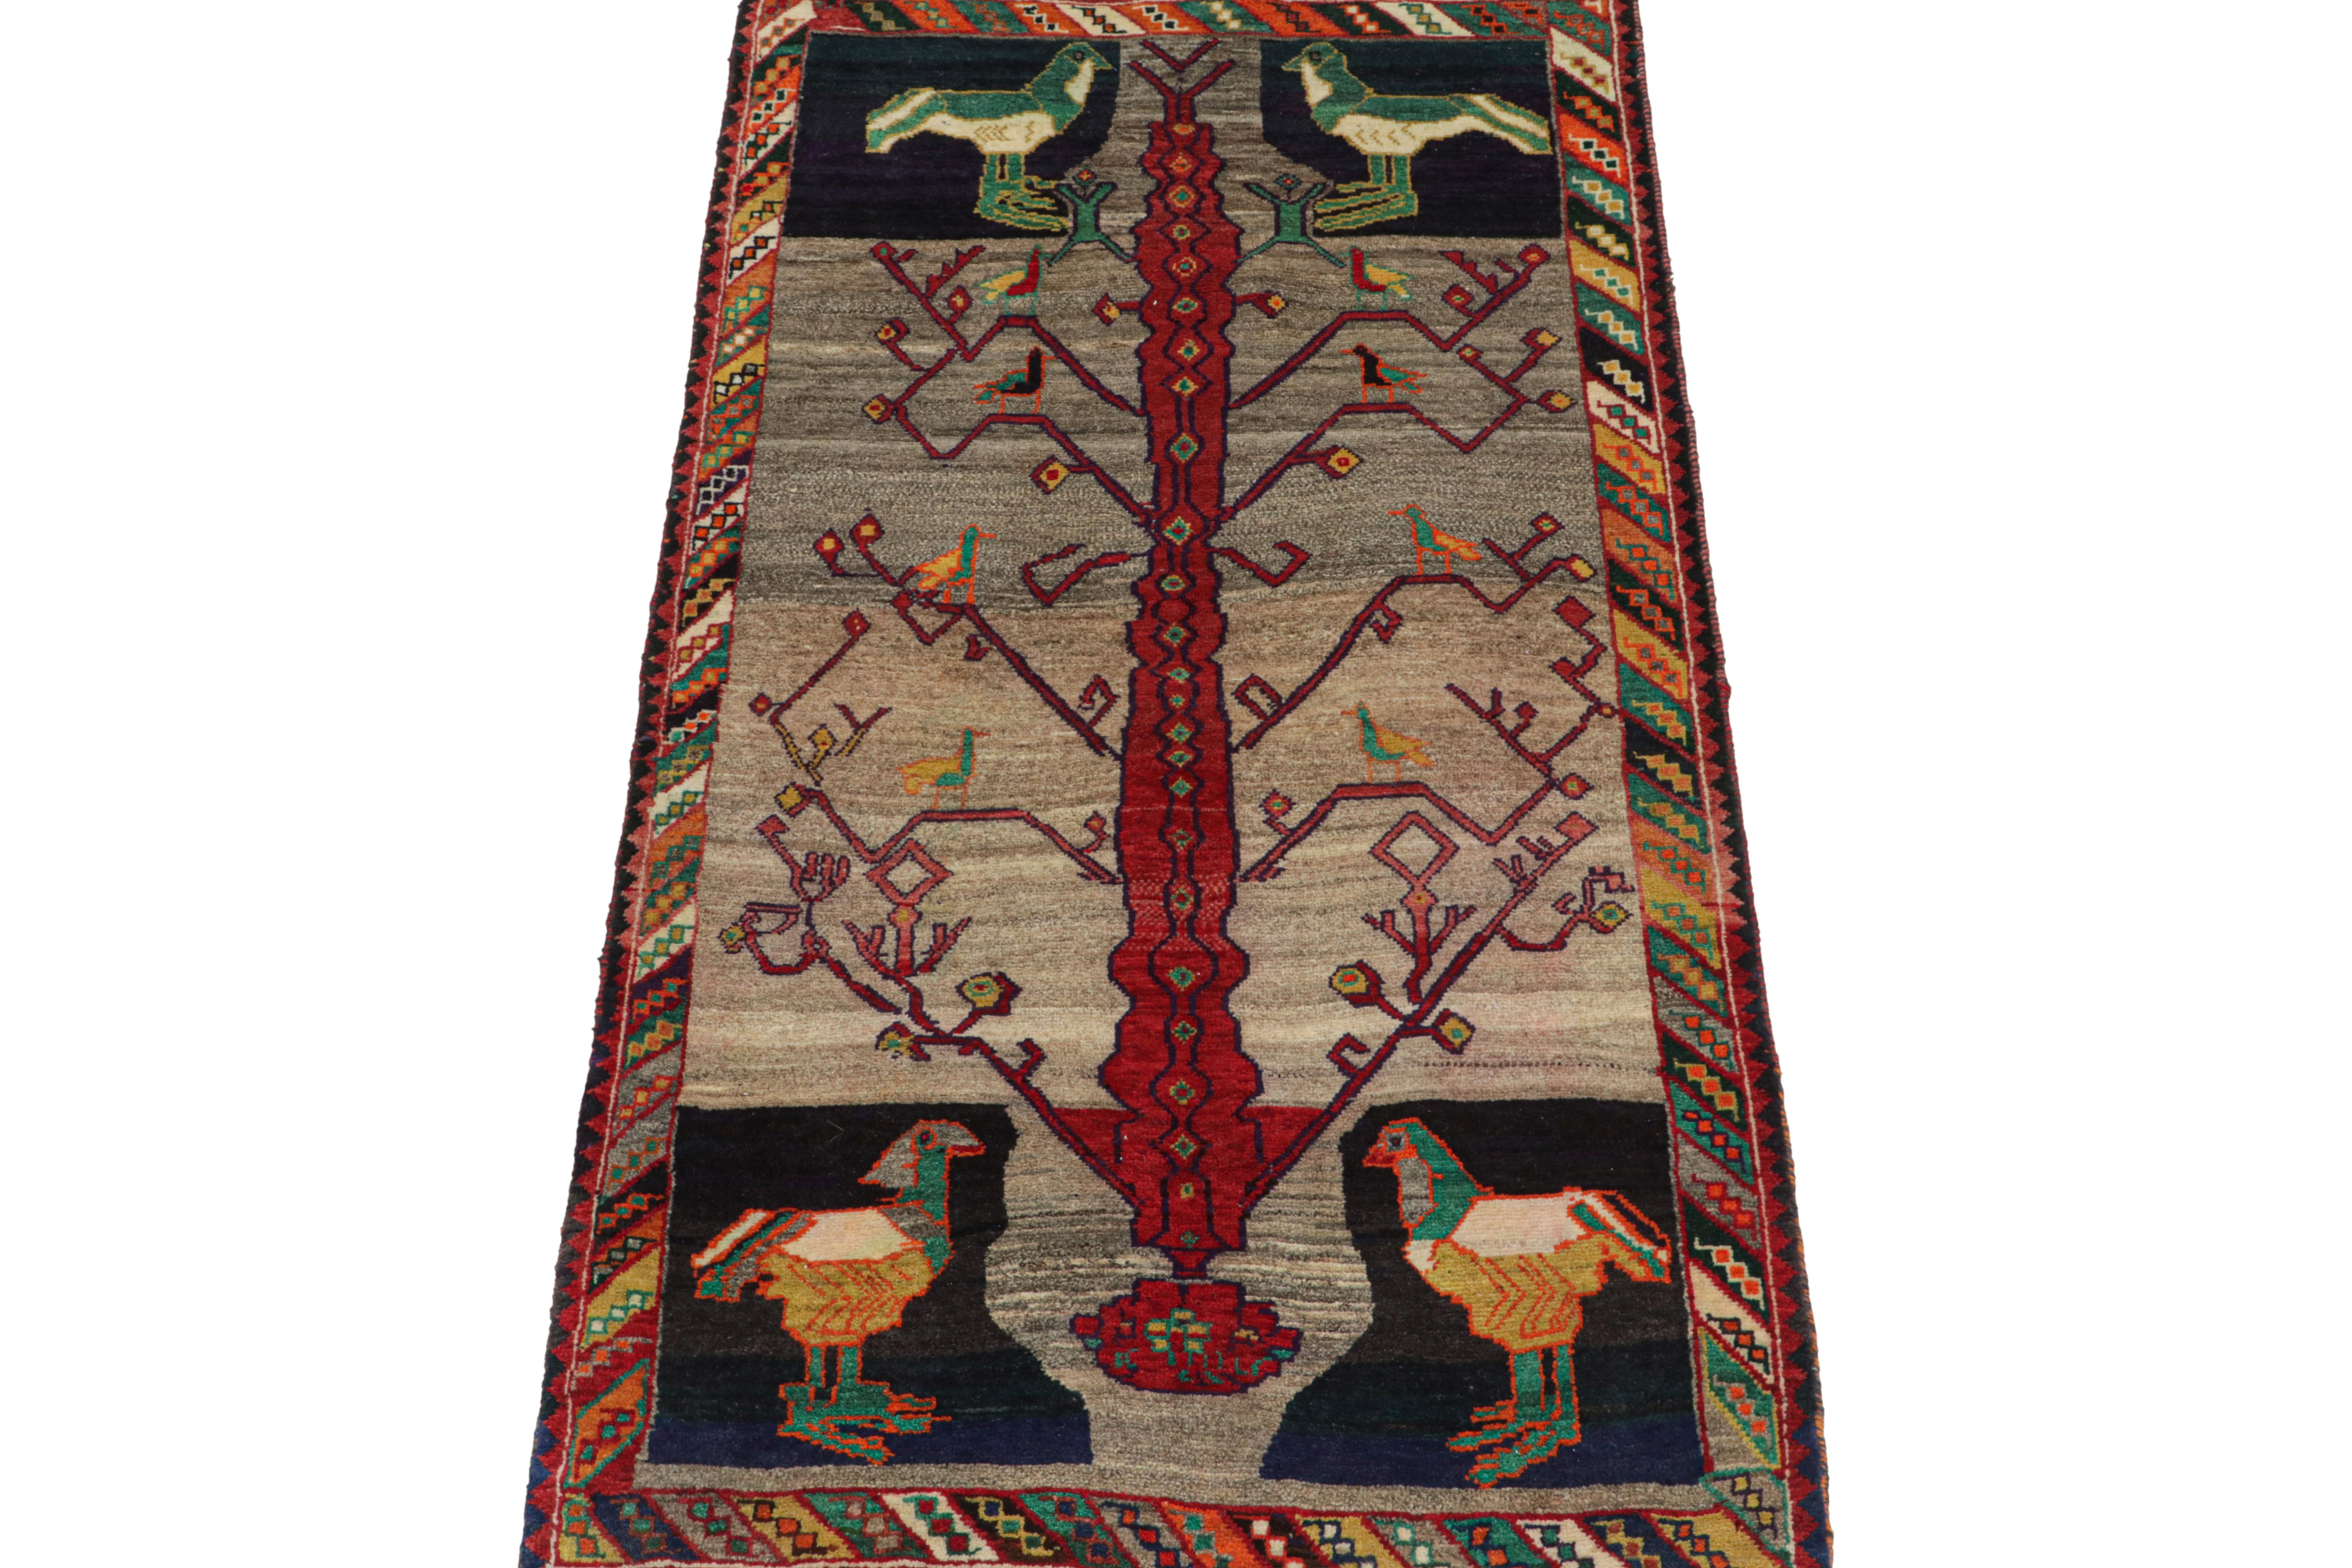 This vintage 3x7 Persian runner is a rare tribal rug, hand-knotted in wool circa 1950-1960.

Further on the design:

The design enjoys a colorful pictorial scene that depicts birds, large and small, on and beside the branches of a tree. It hosts